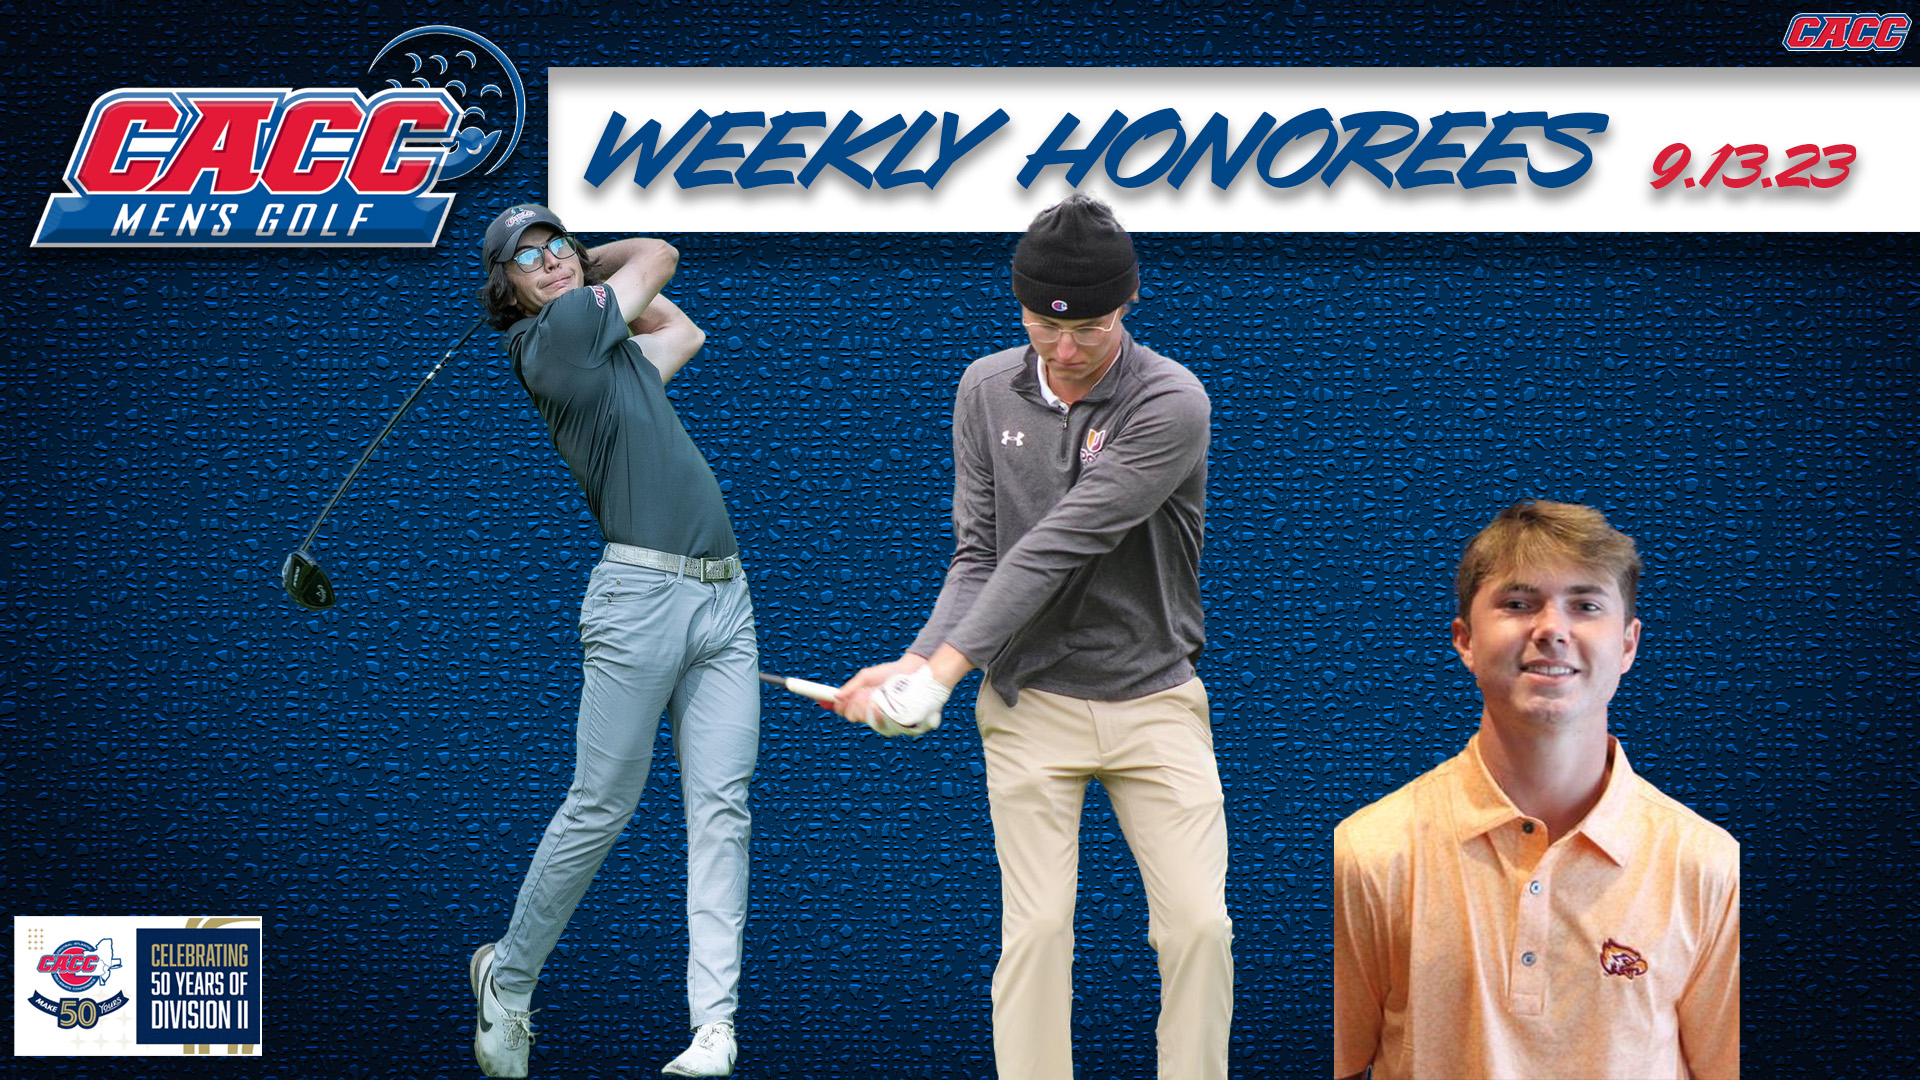 CACC Men's Golf Weekly Honorees (9-13-23)